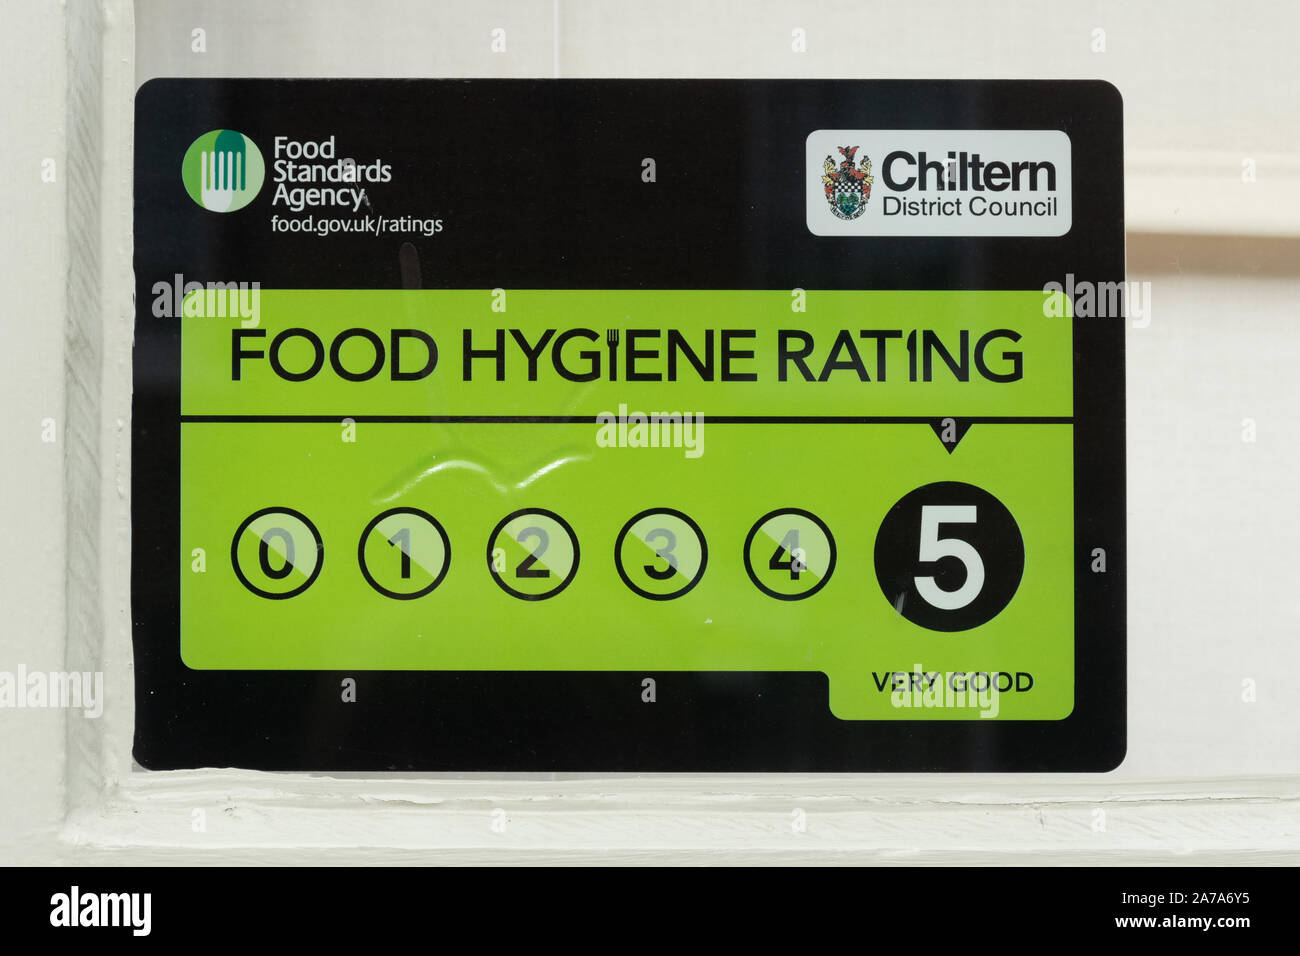 Food hygiene rating 5, top rating symbol on the exterior of a restaurant, UK Stock Photo